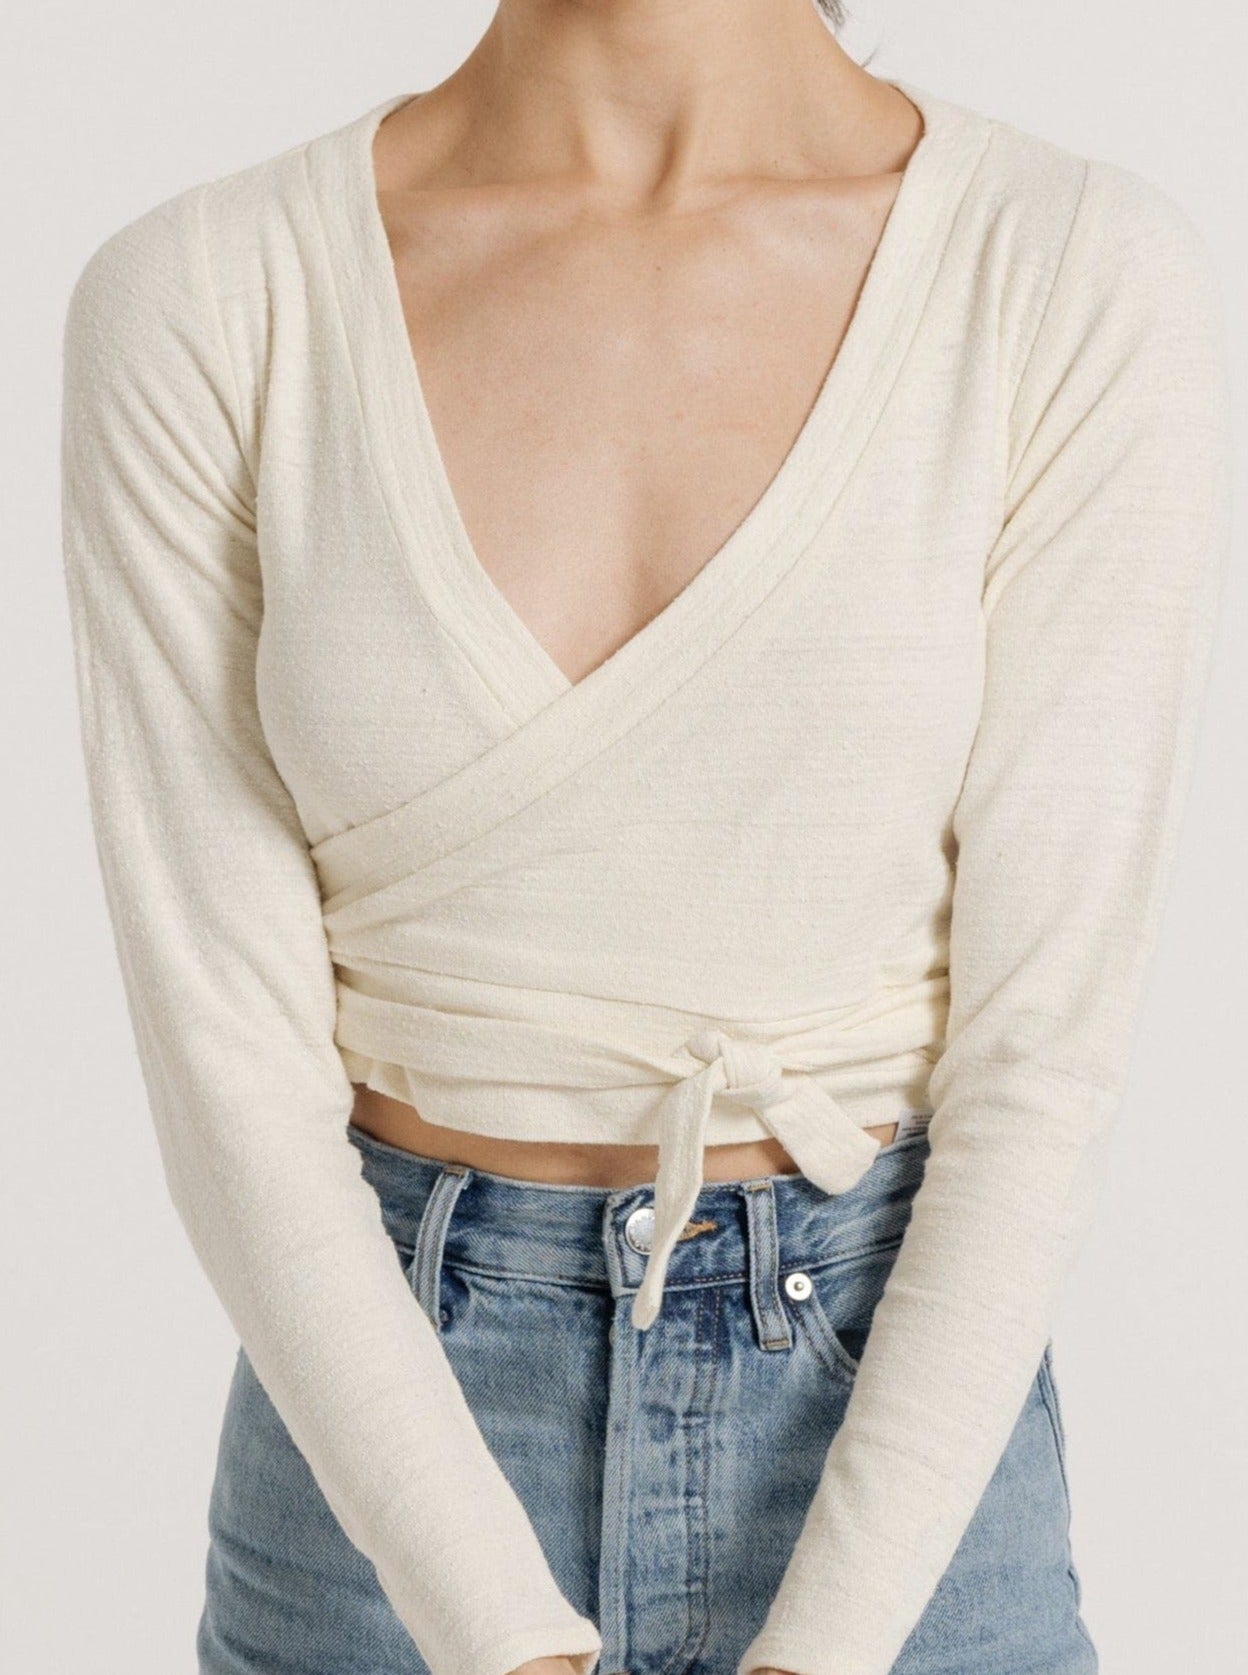 A woman in a Ballet Wrap Top - Ivory Silk Noil and blue jeans standing against a neutral background.